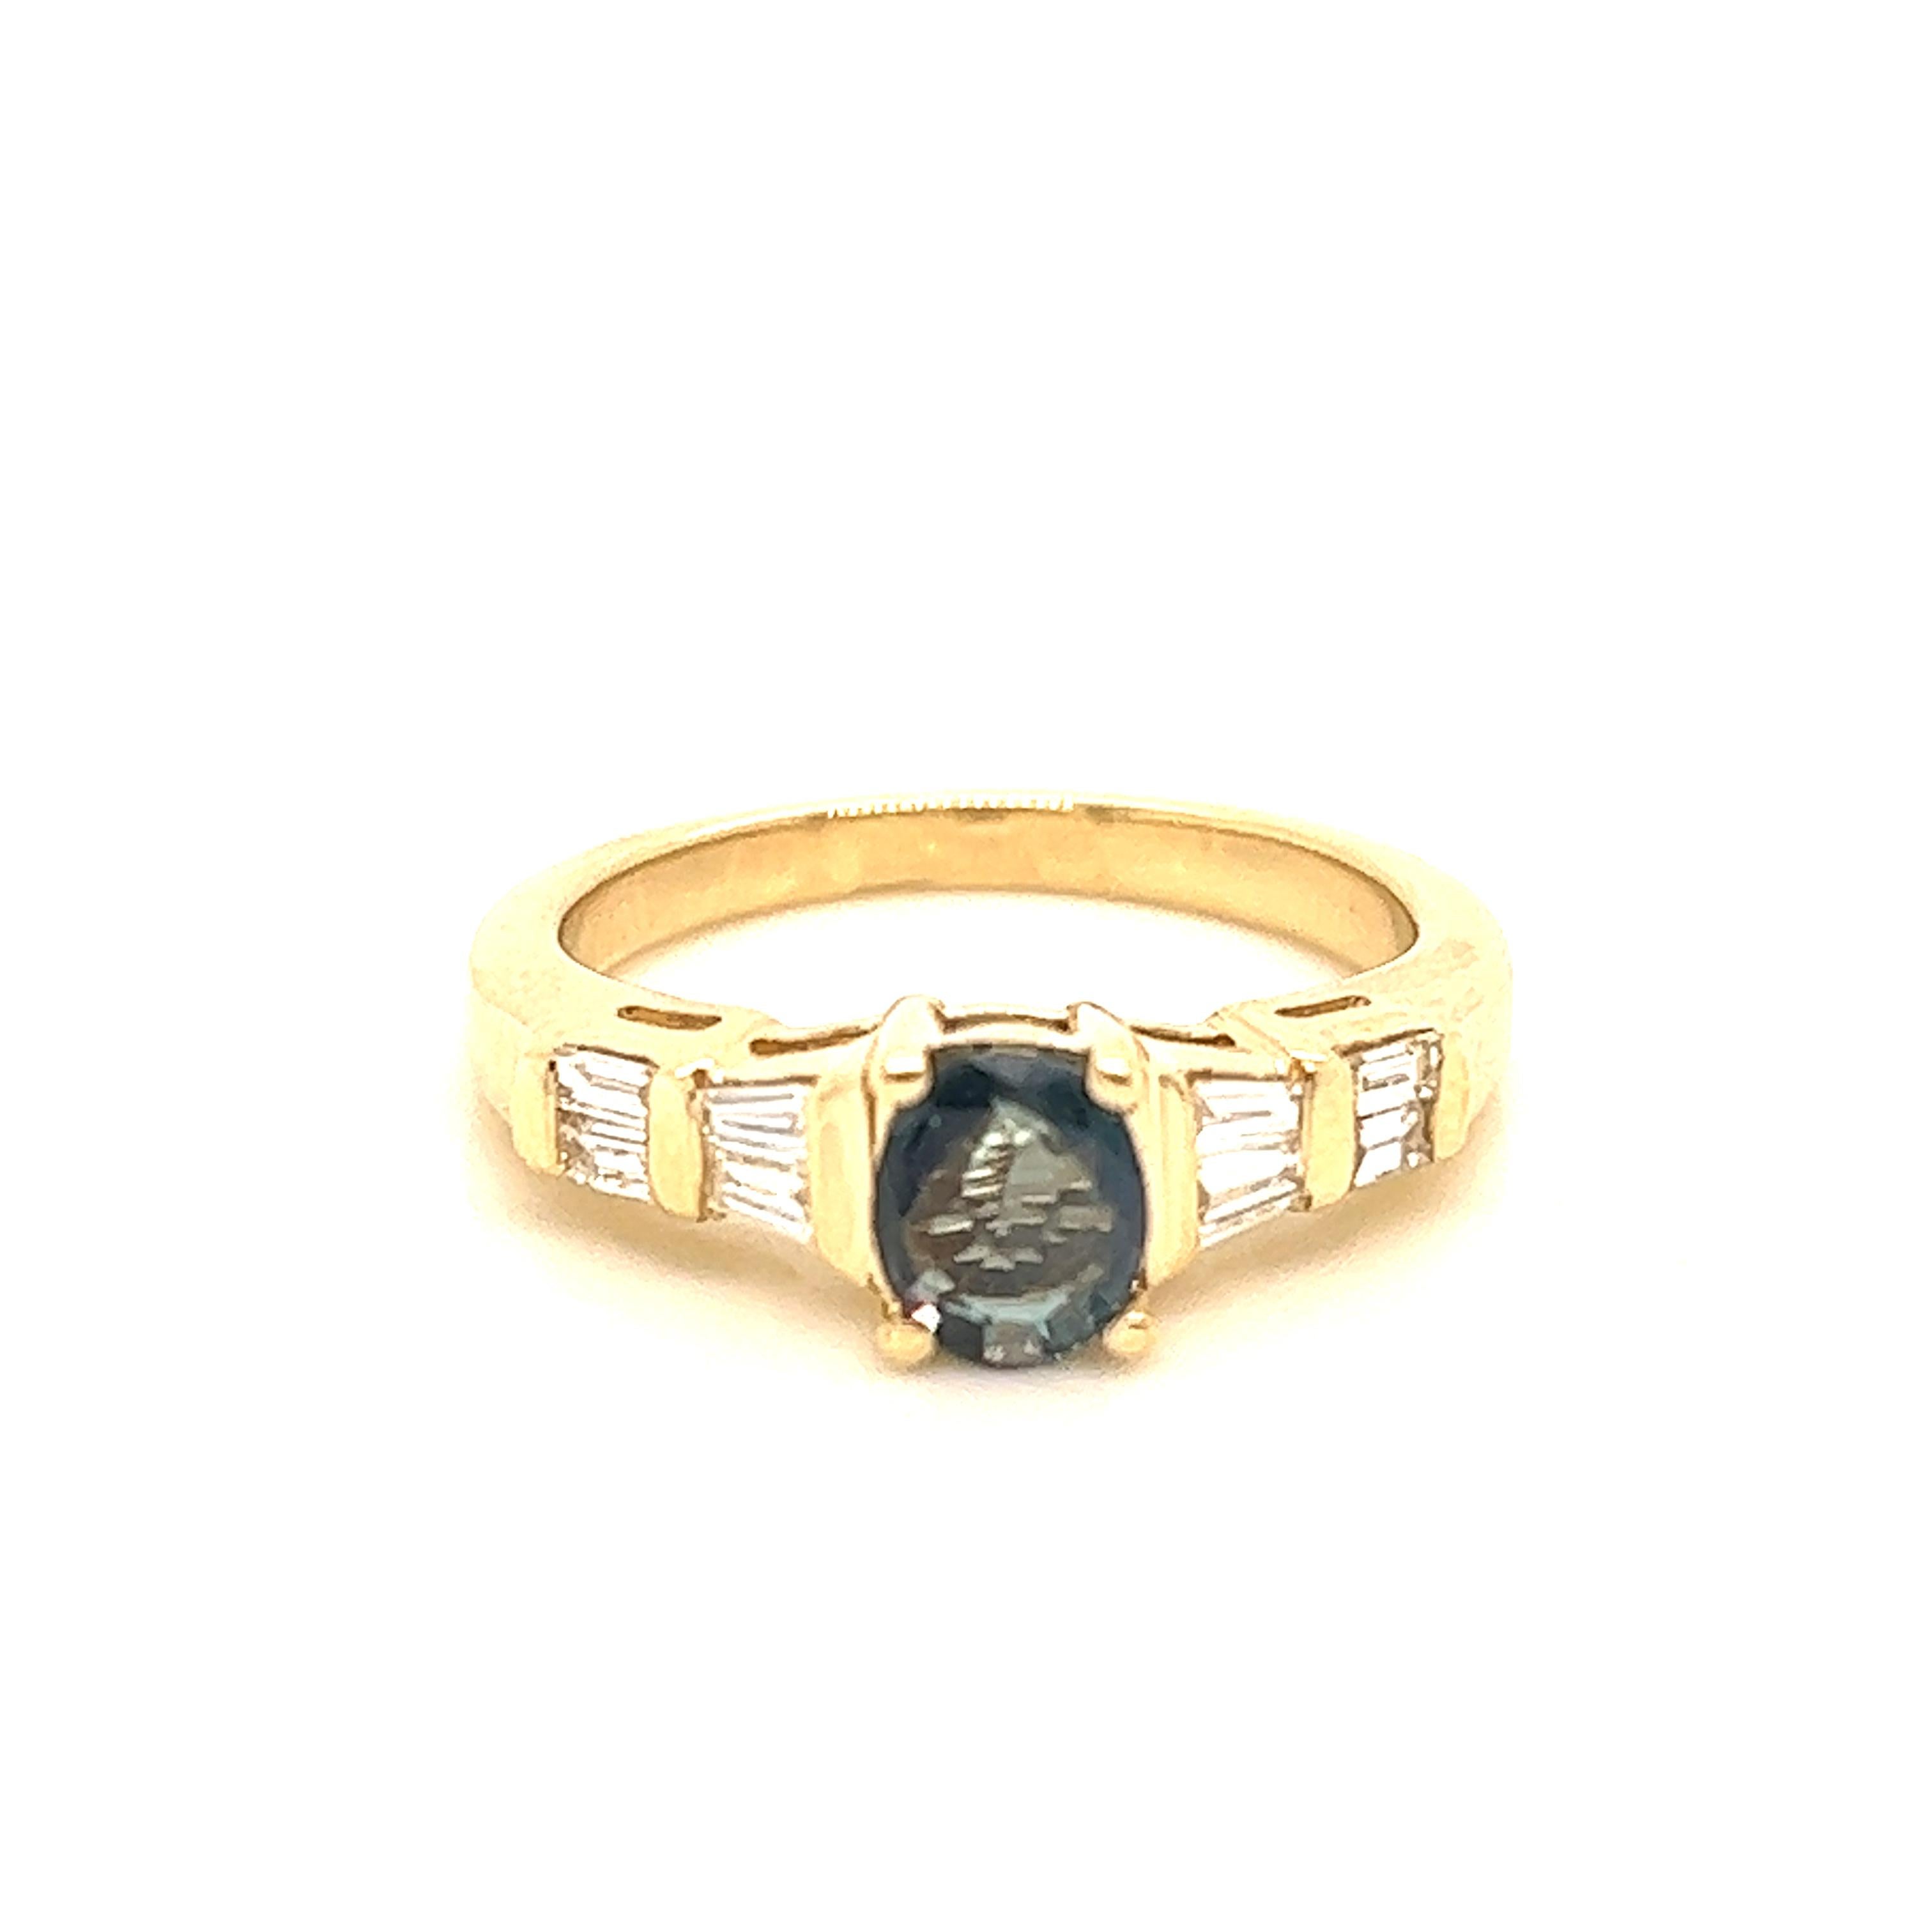 This is a gorgeous natural AAA quality oval Alexandrite surrounded by dainty diamonds that is set in a vintage yellow gold setting. This ring features a natural 0.78 carat oval alexandrite that is surrounded by brilliant white diamonds. The ring is